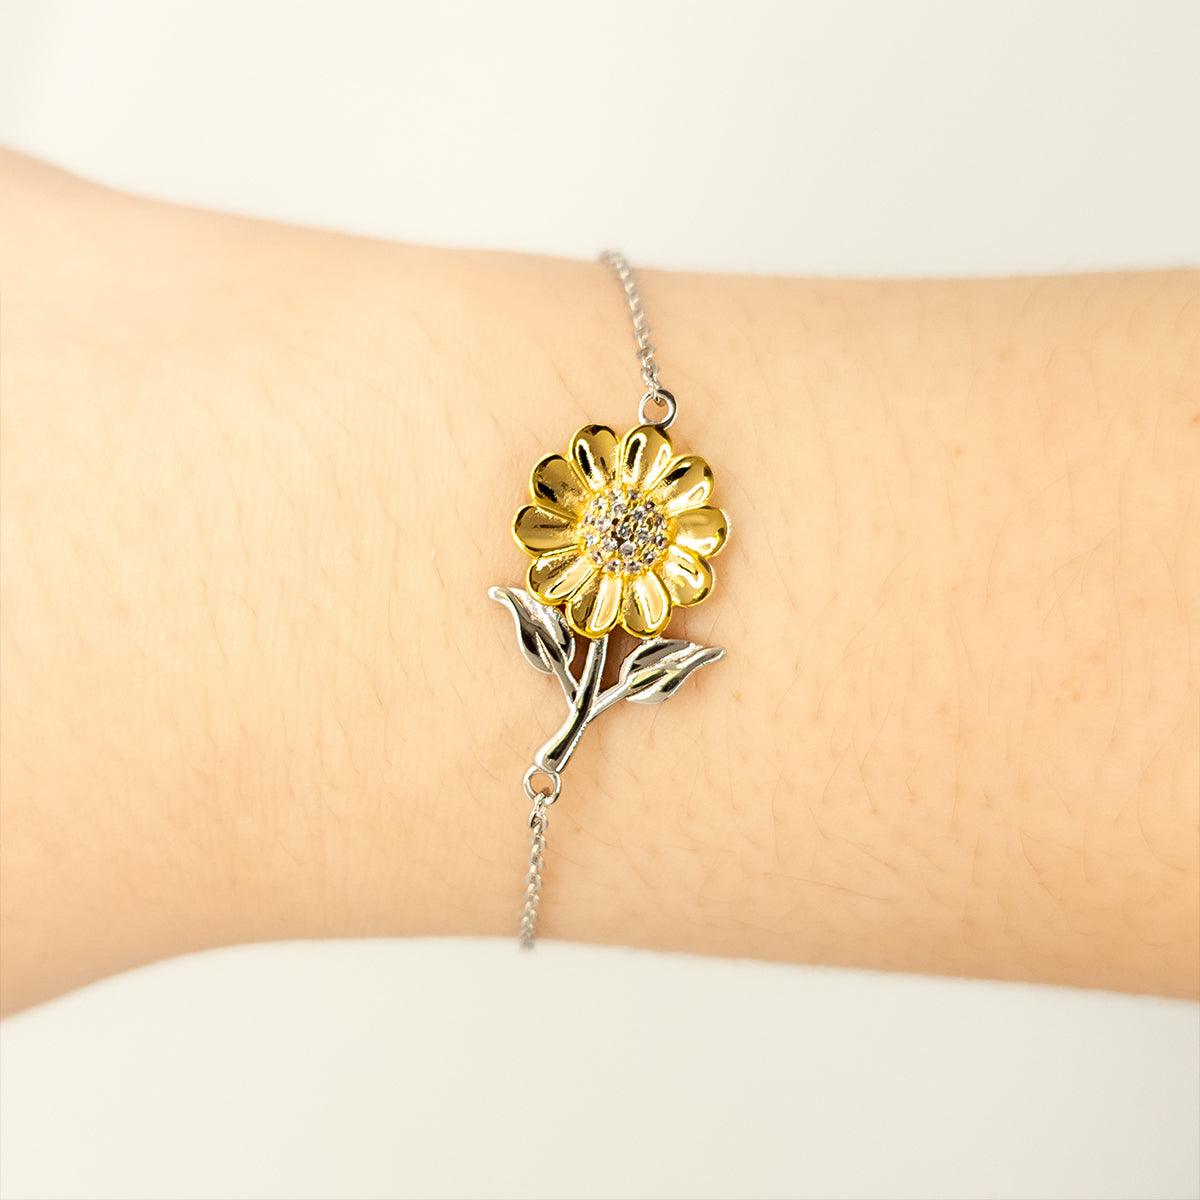 Motivational Son-In-Law Sunflower Bracelet - I can promise to love you for the rest of my life, Birthday, Christmas Holiday Jewelry Gift - Mallard Moon Gift Shop